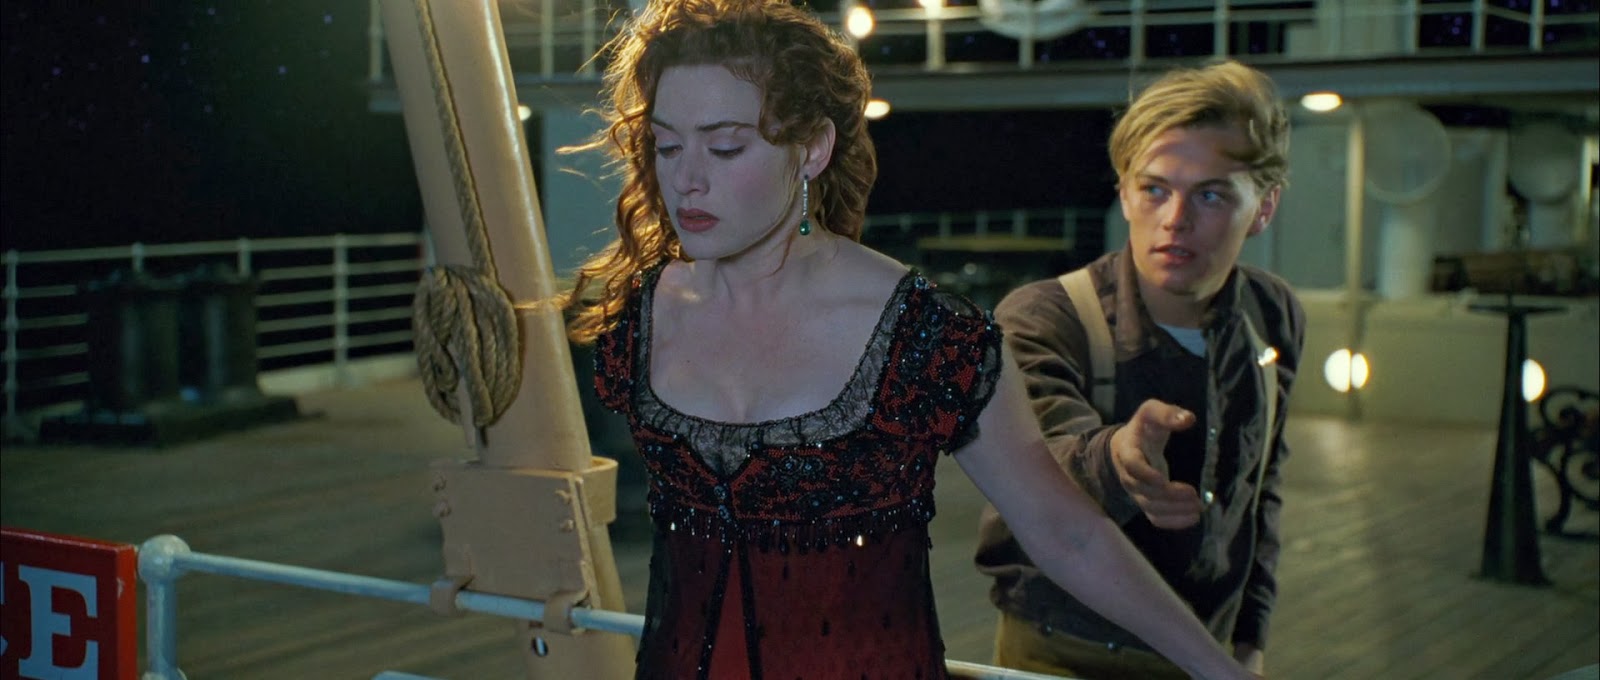 How much money did Rose make from Titanic?